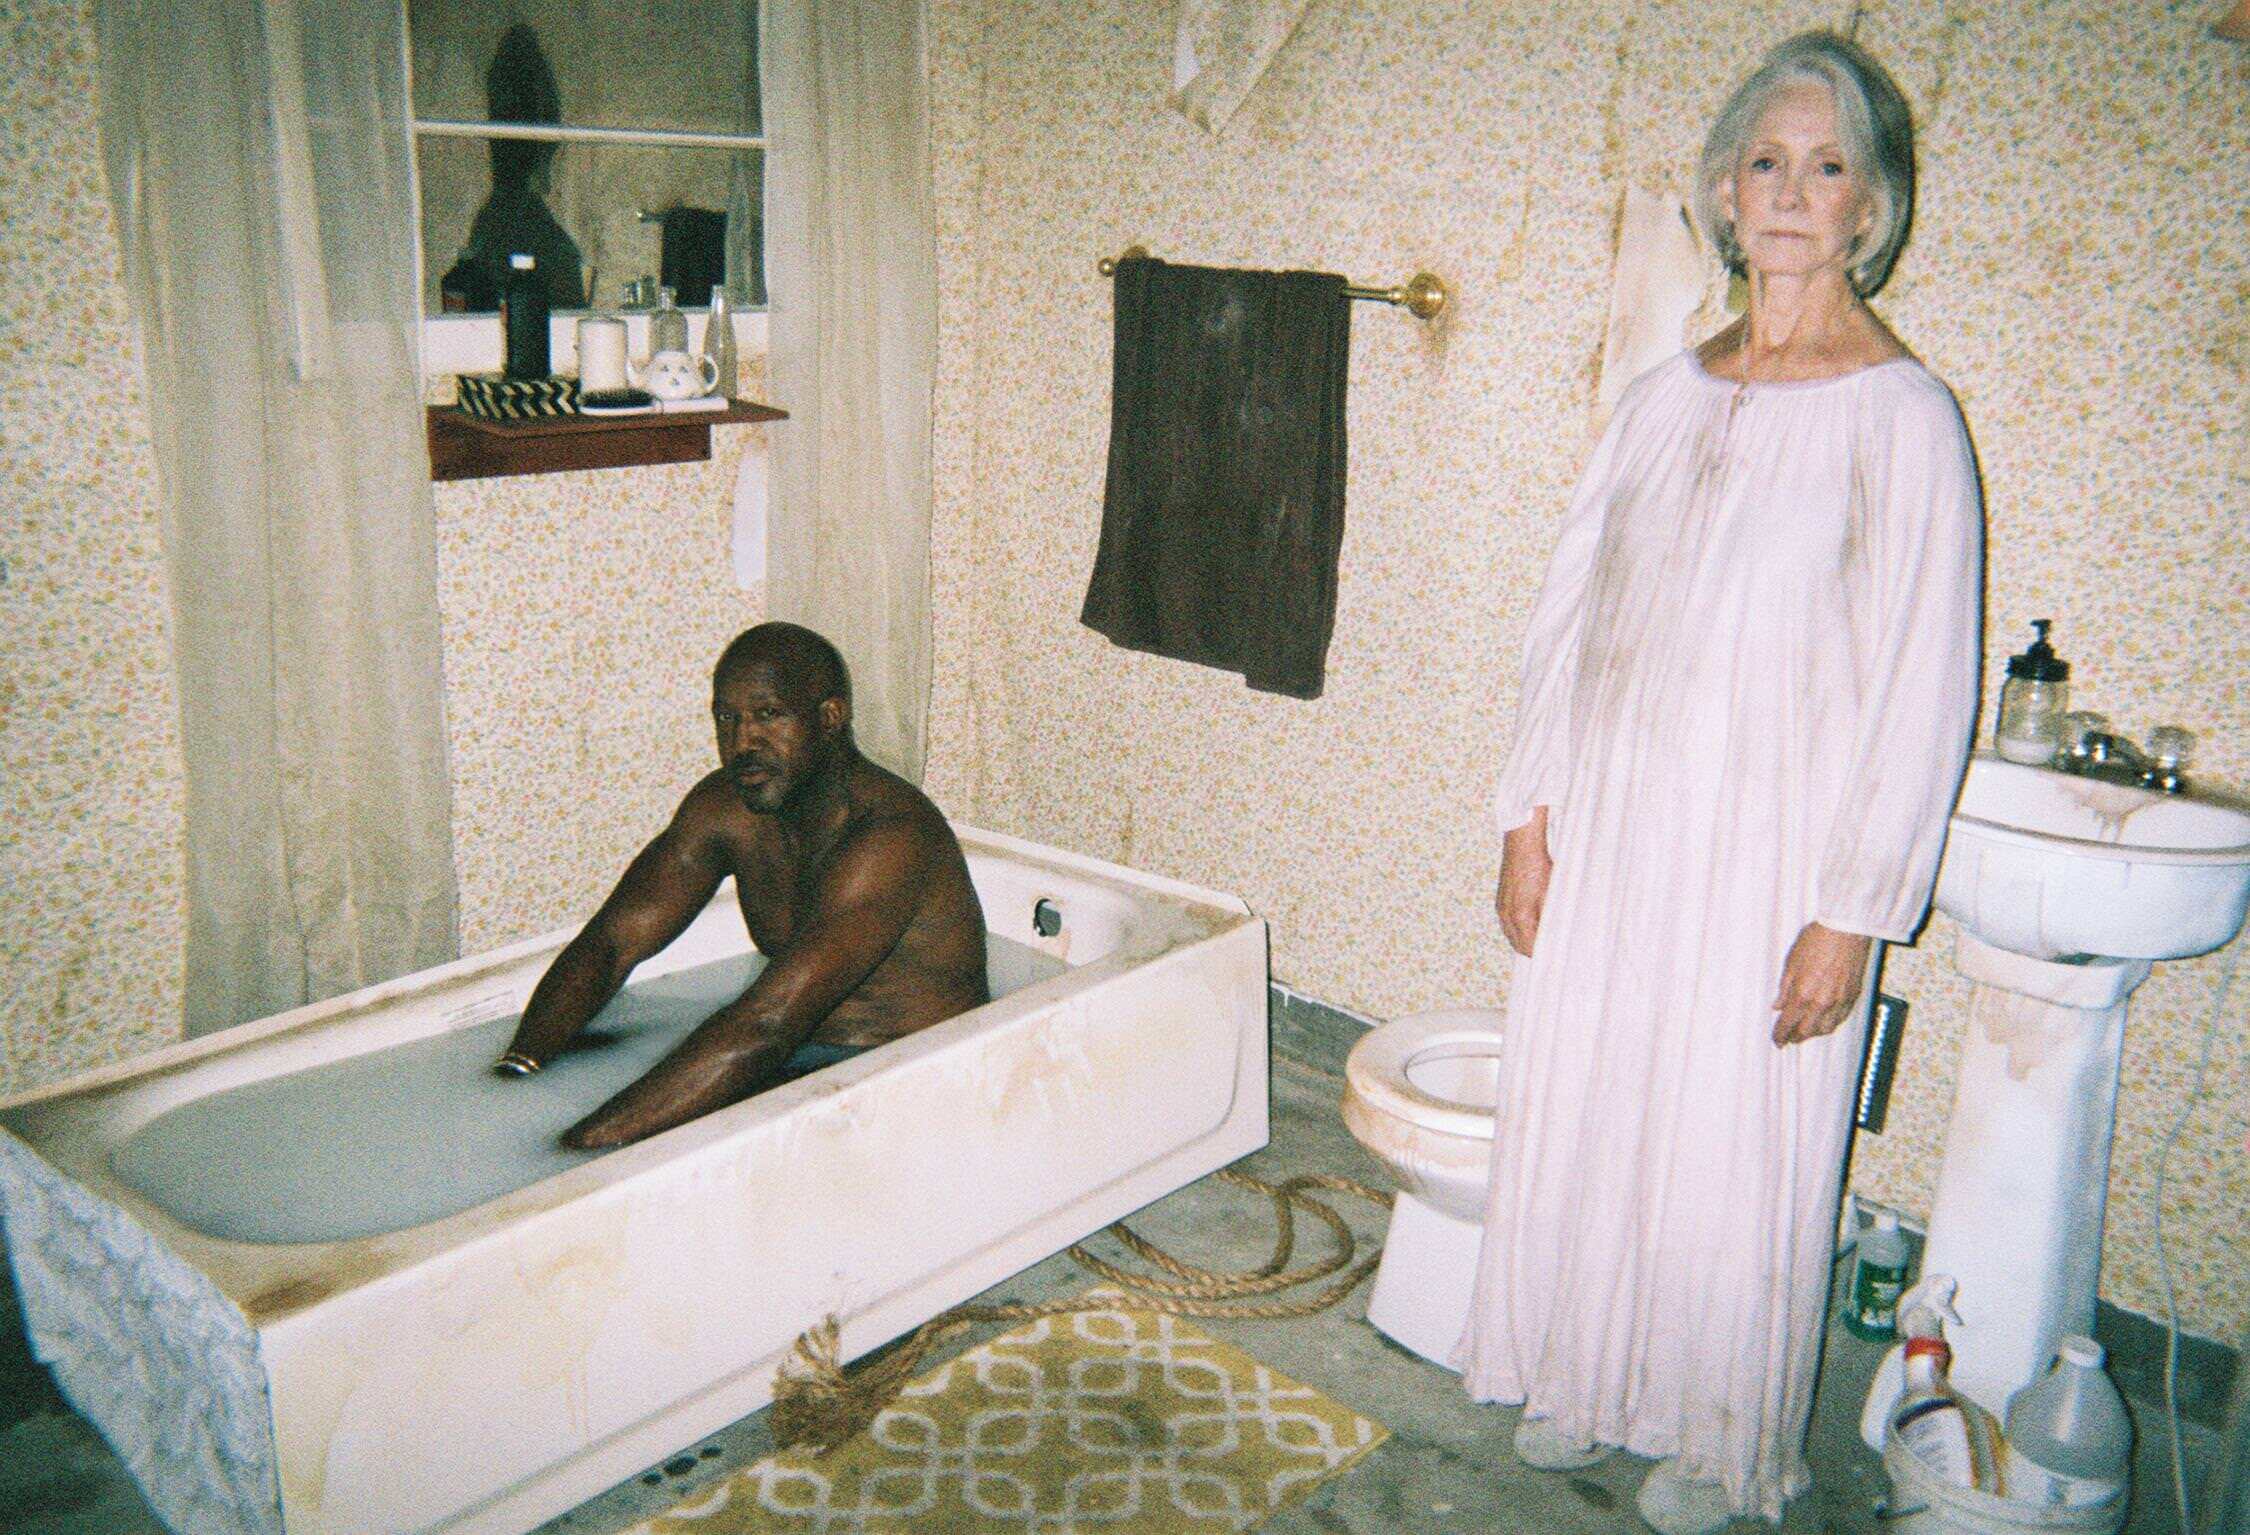 A black man in a bath tub and an old woman with stained white outfit standing beside him